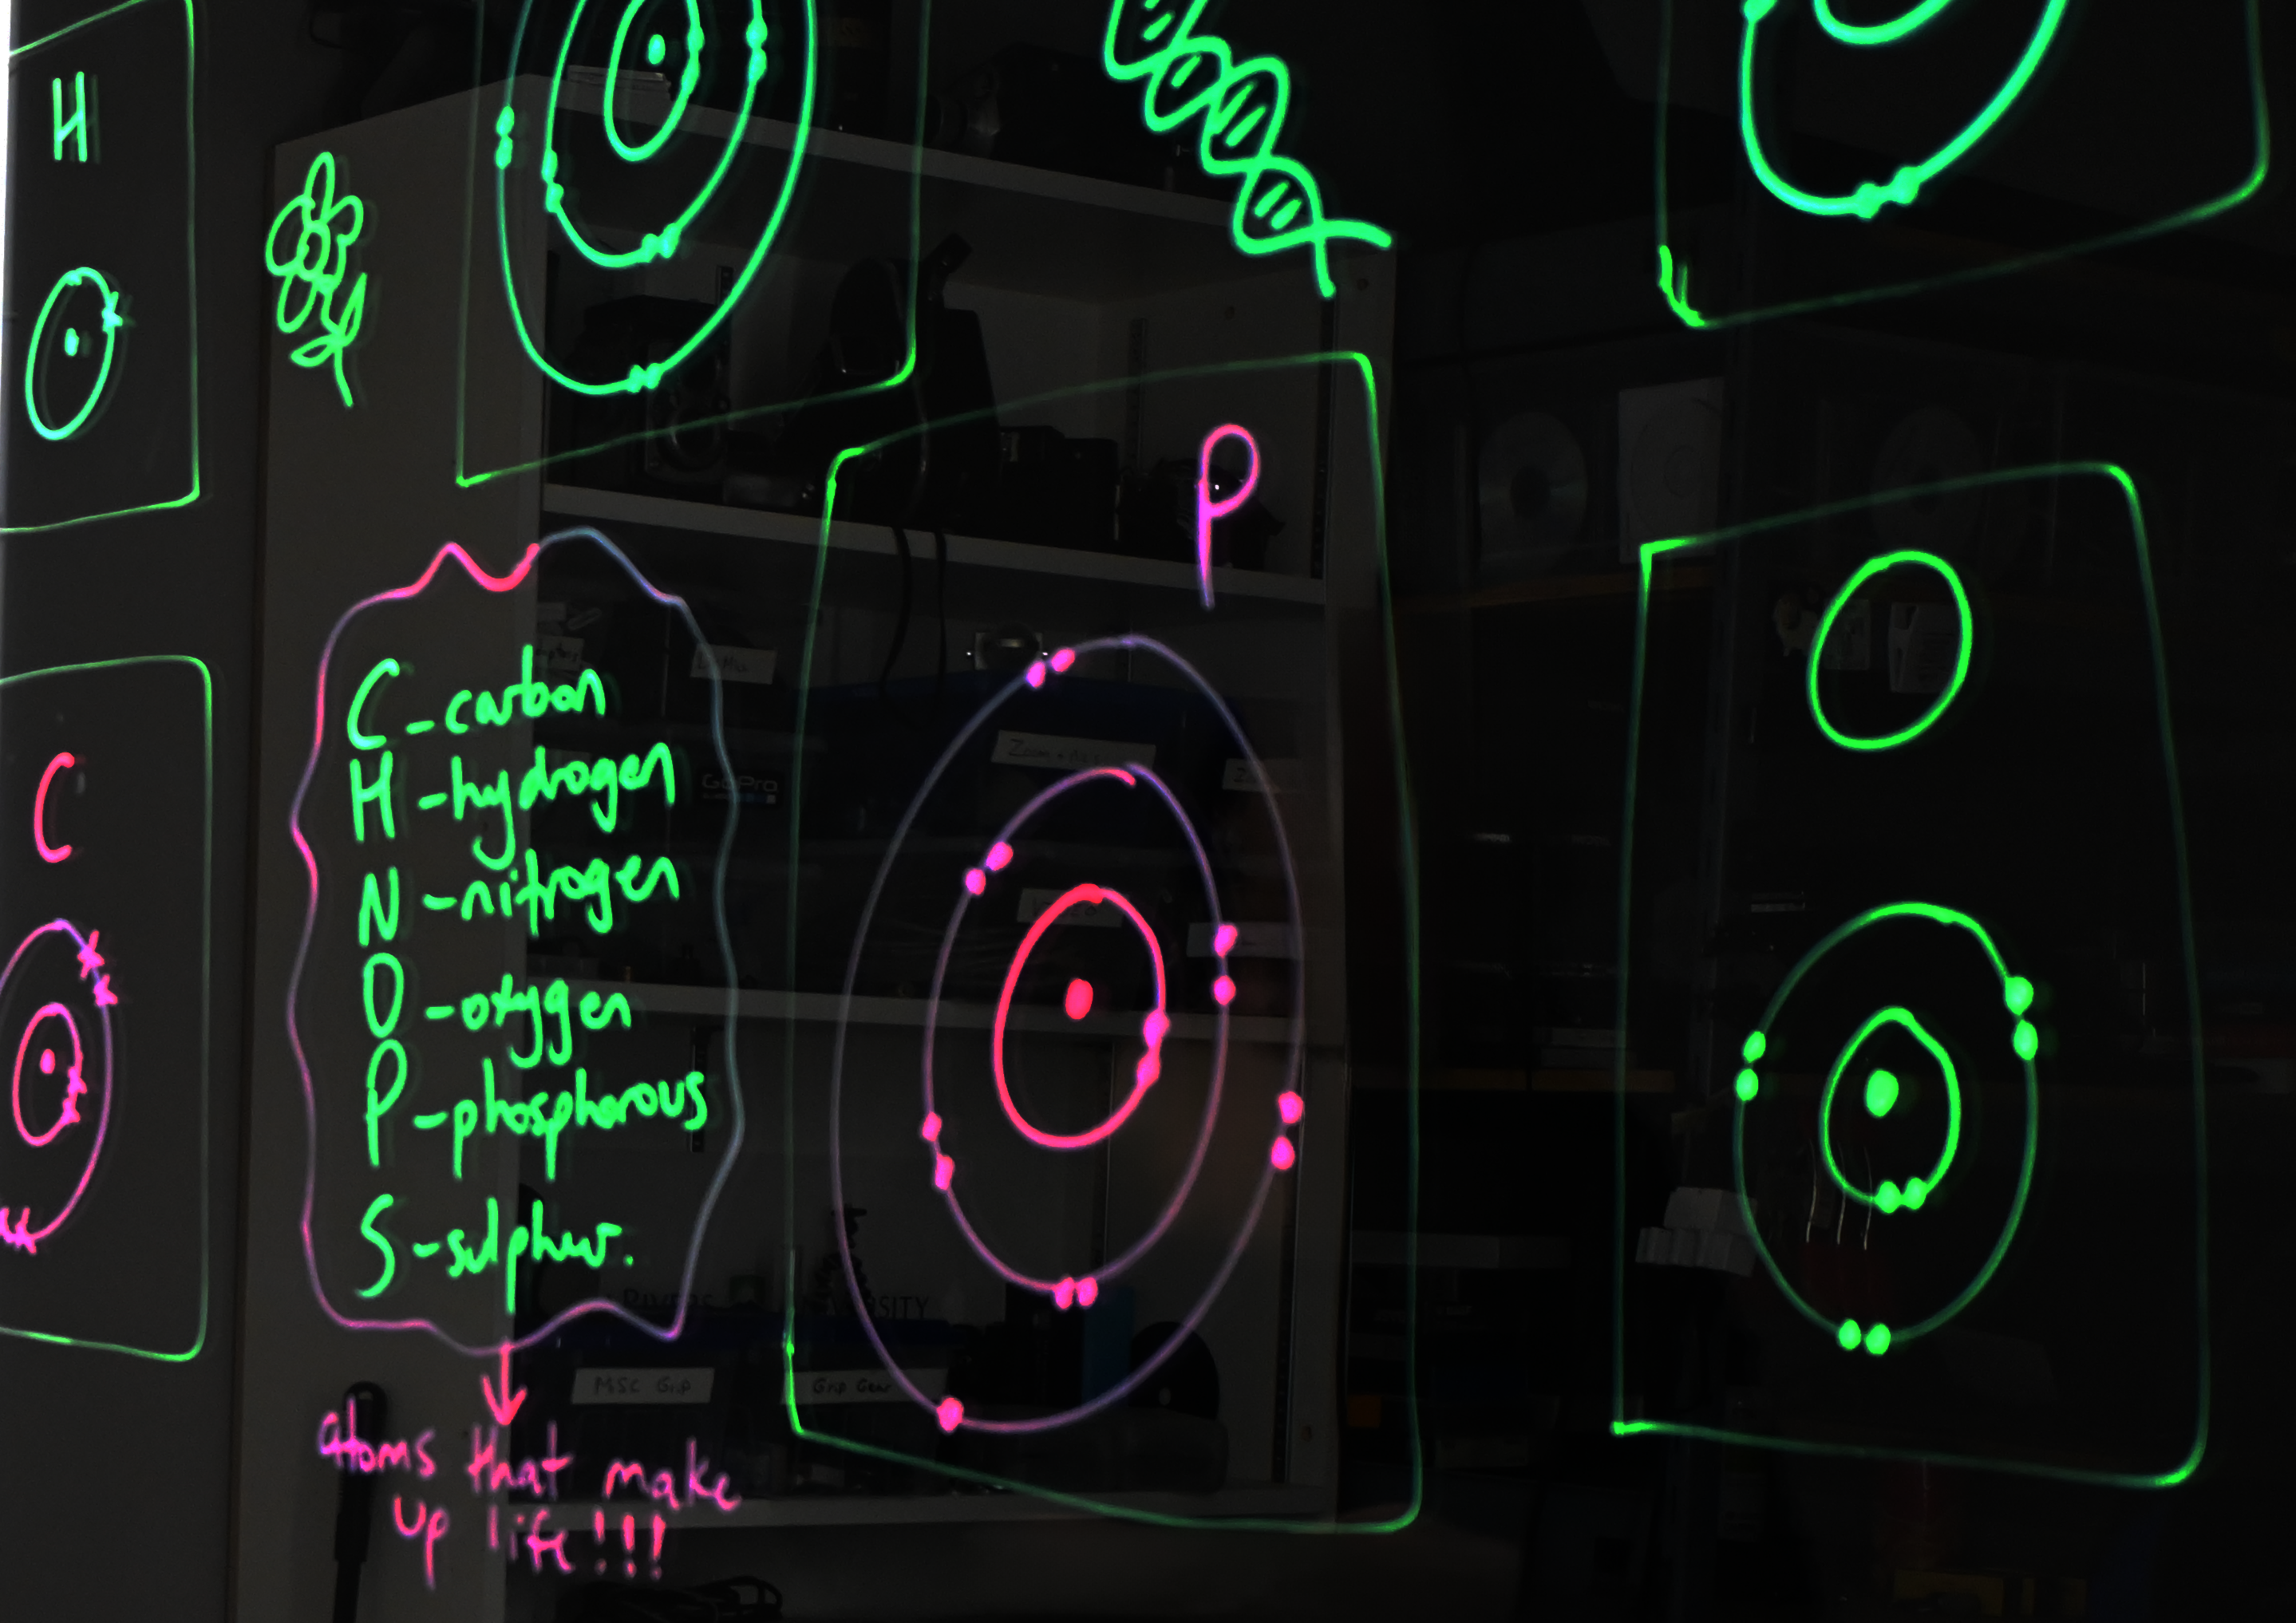 Writing on a light board shows Bohr models of sulphur, nitrogen, phosphorus, and oxygen. There is a list of the six elements that make up life: carbon, hydrogen, nitrogen, oxygen, phosphorus, and sulphur.